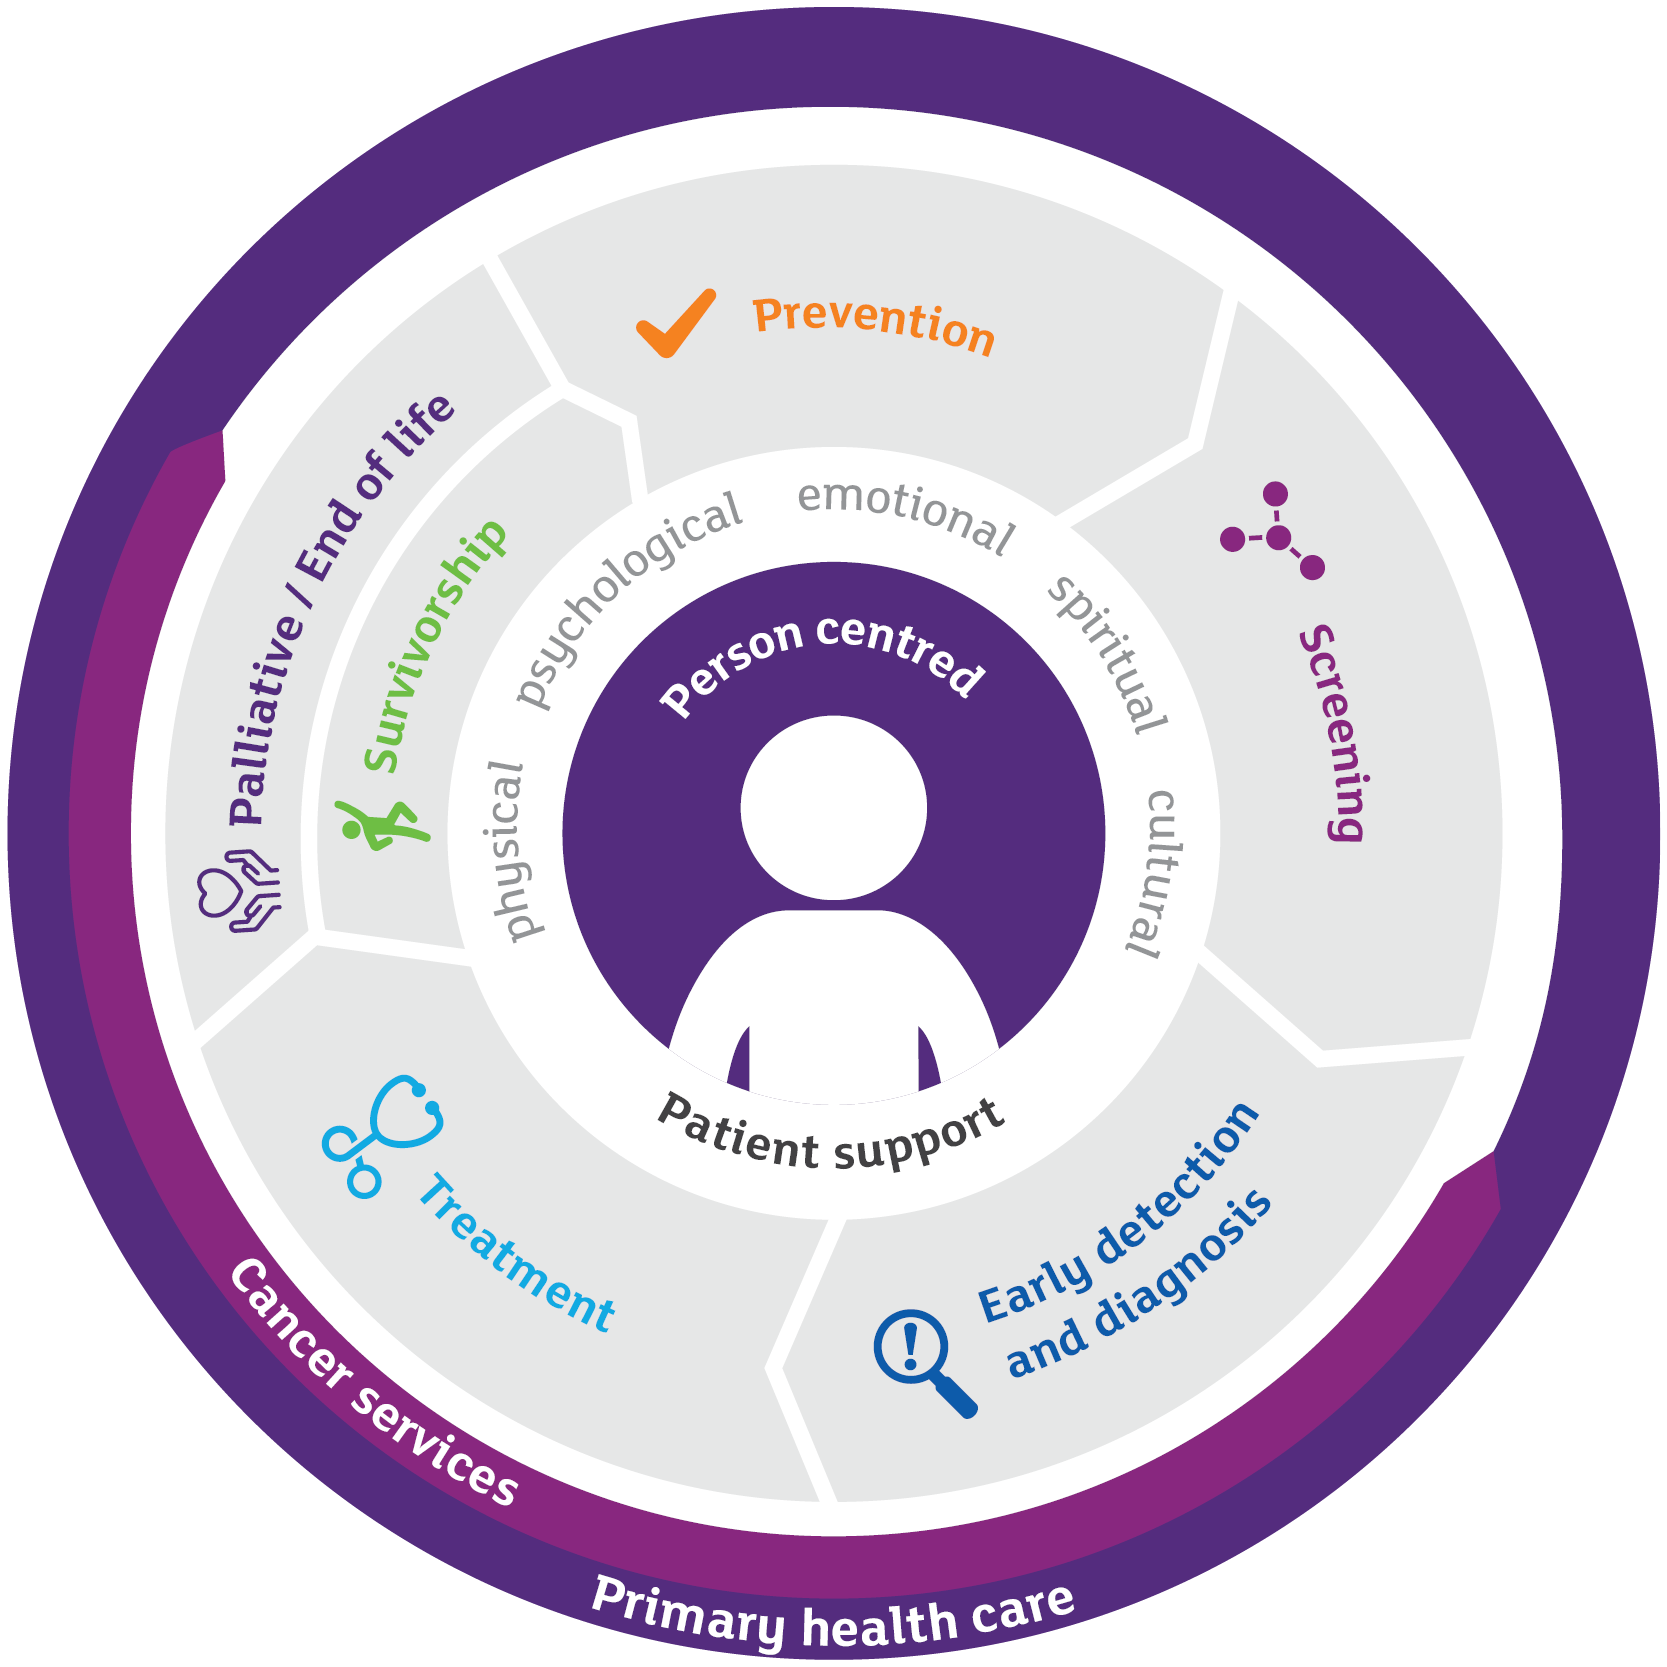 The role of primary health care across cancer control